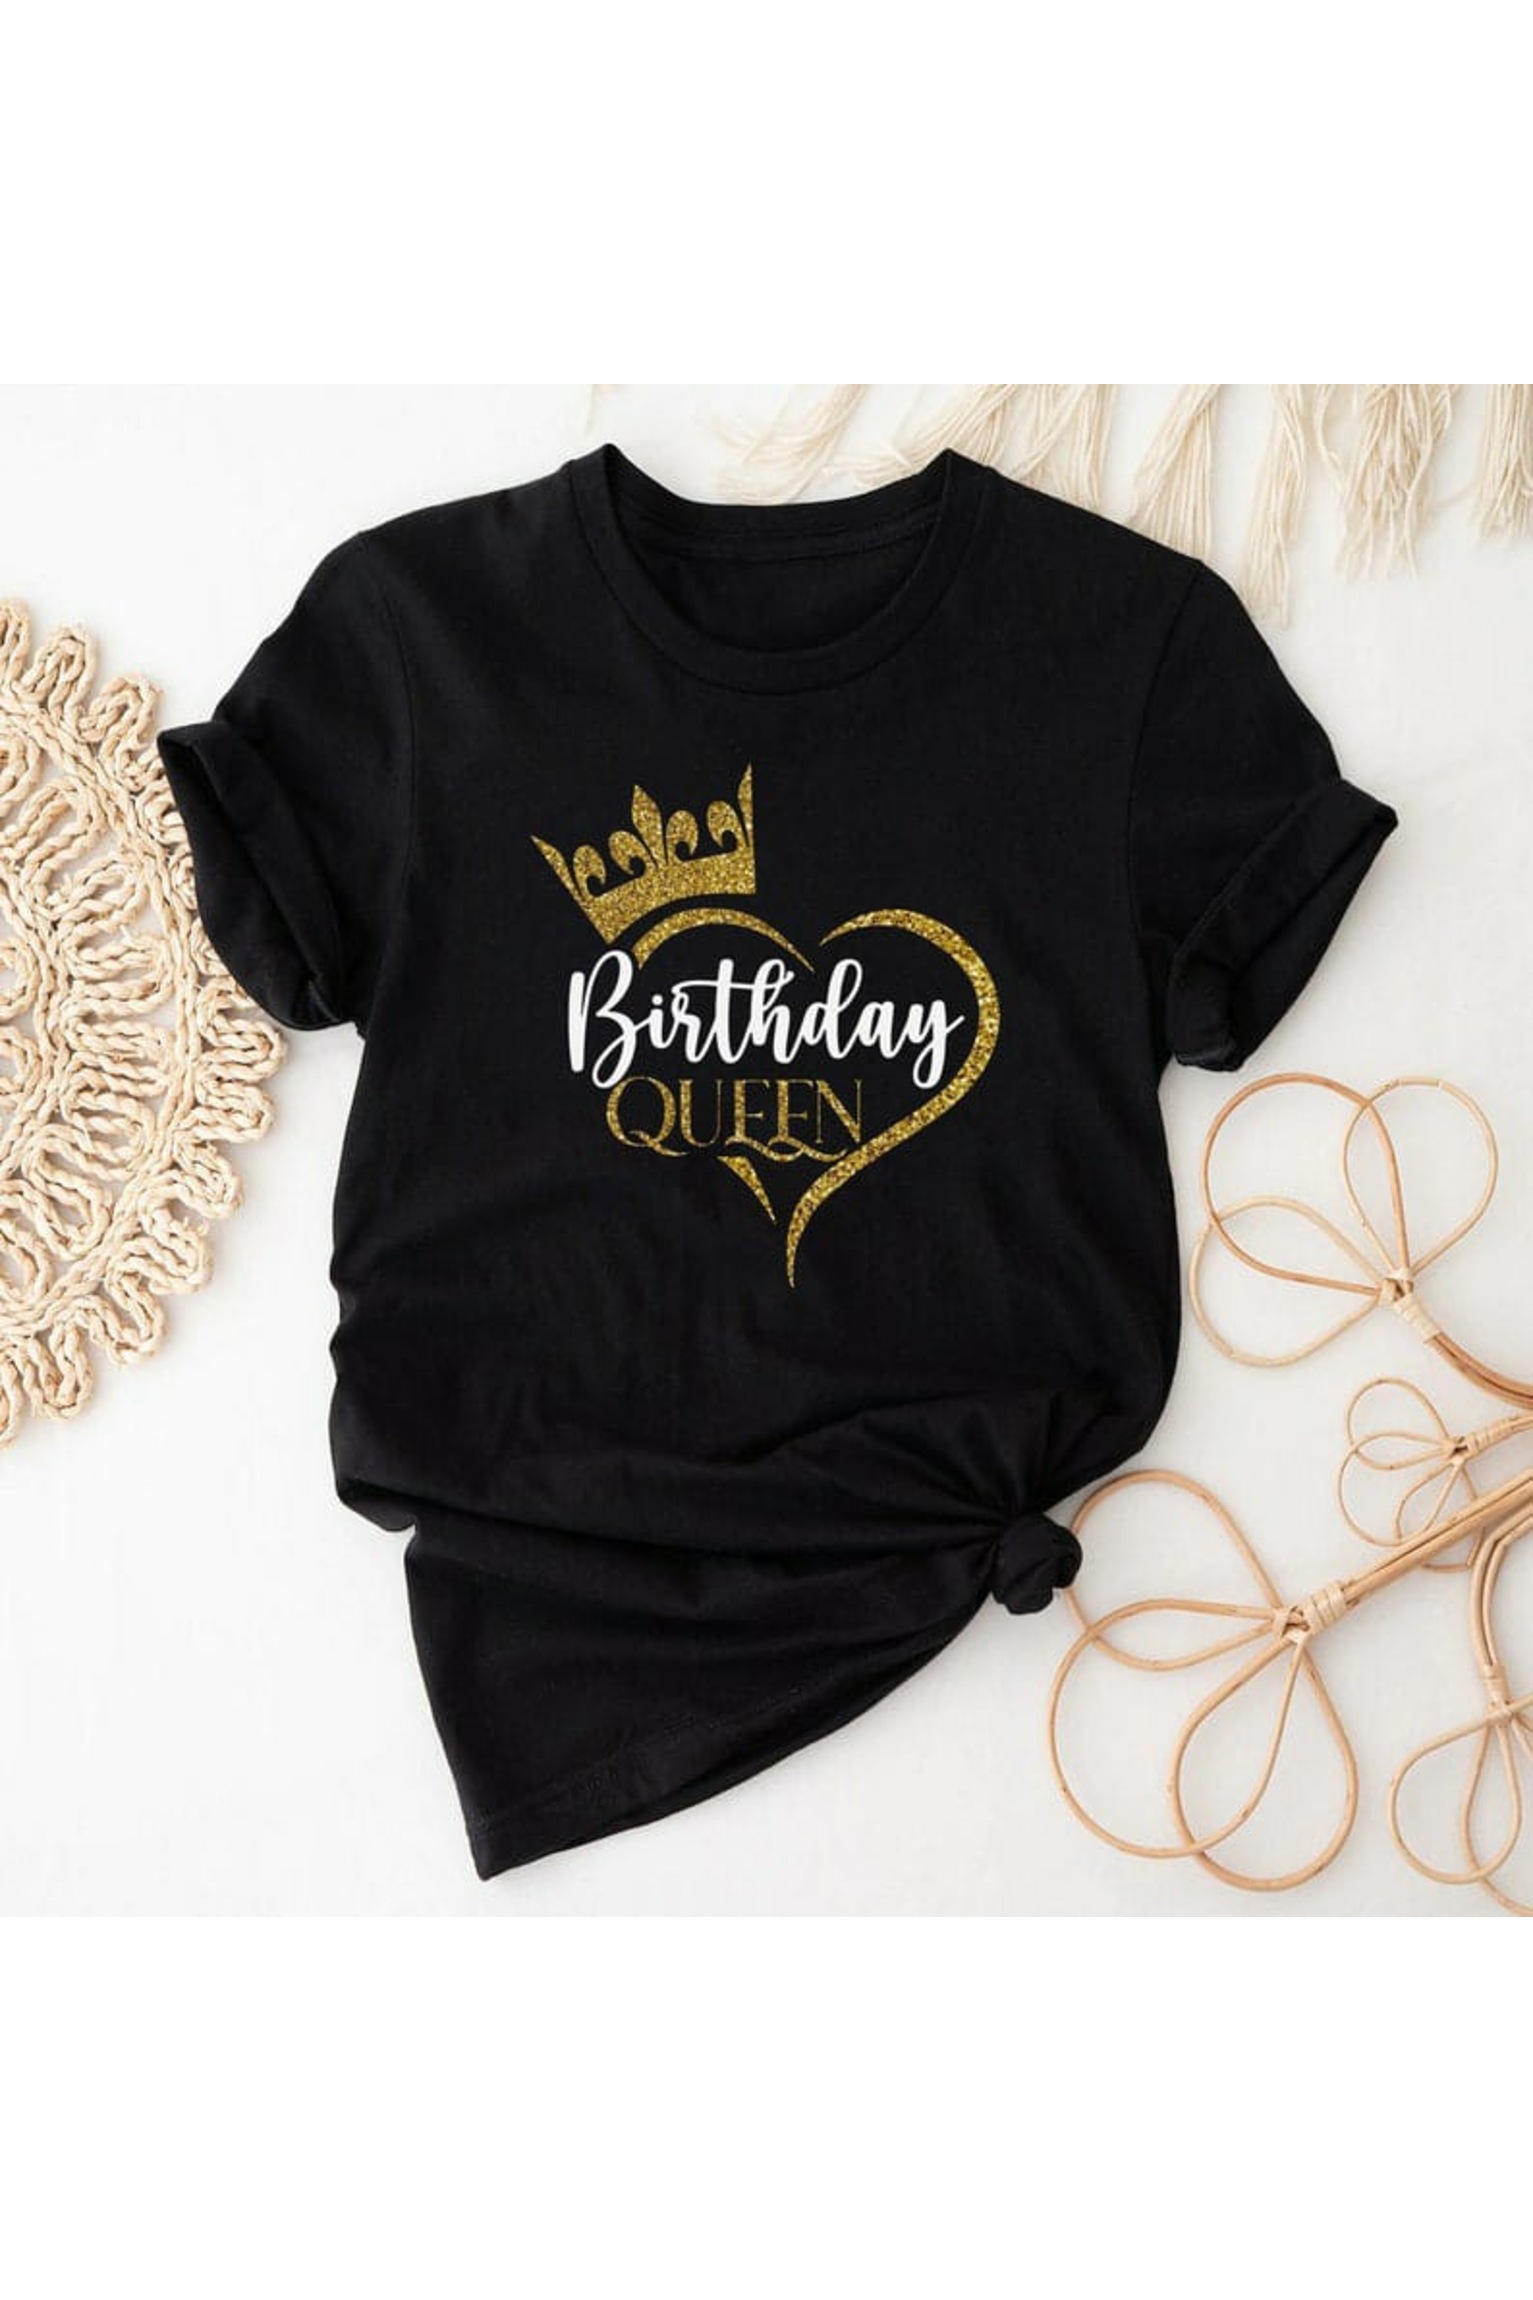 Birthday Queen Printed T-shirt for Women